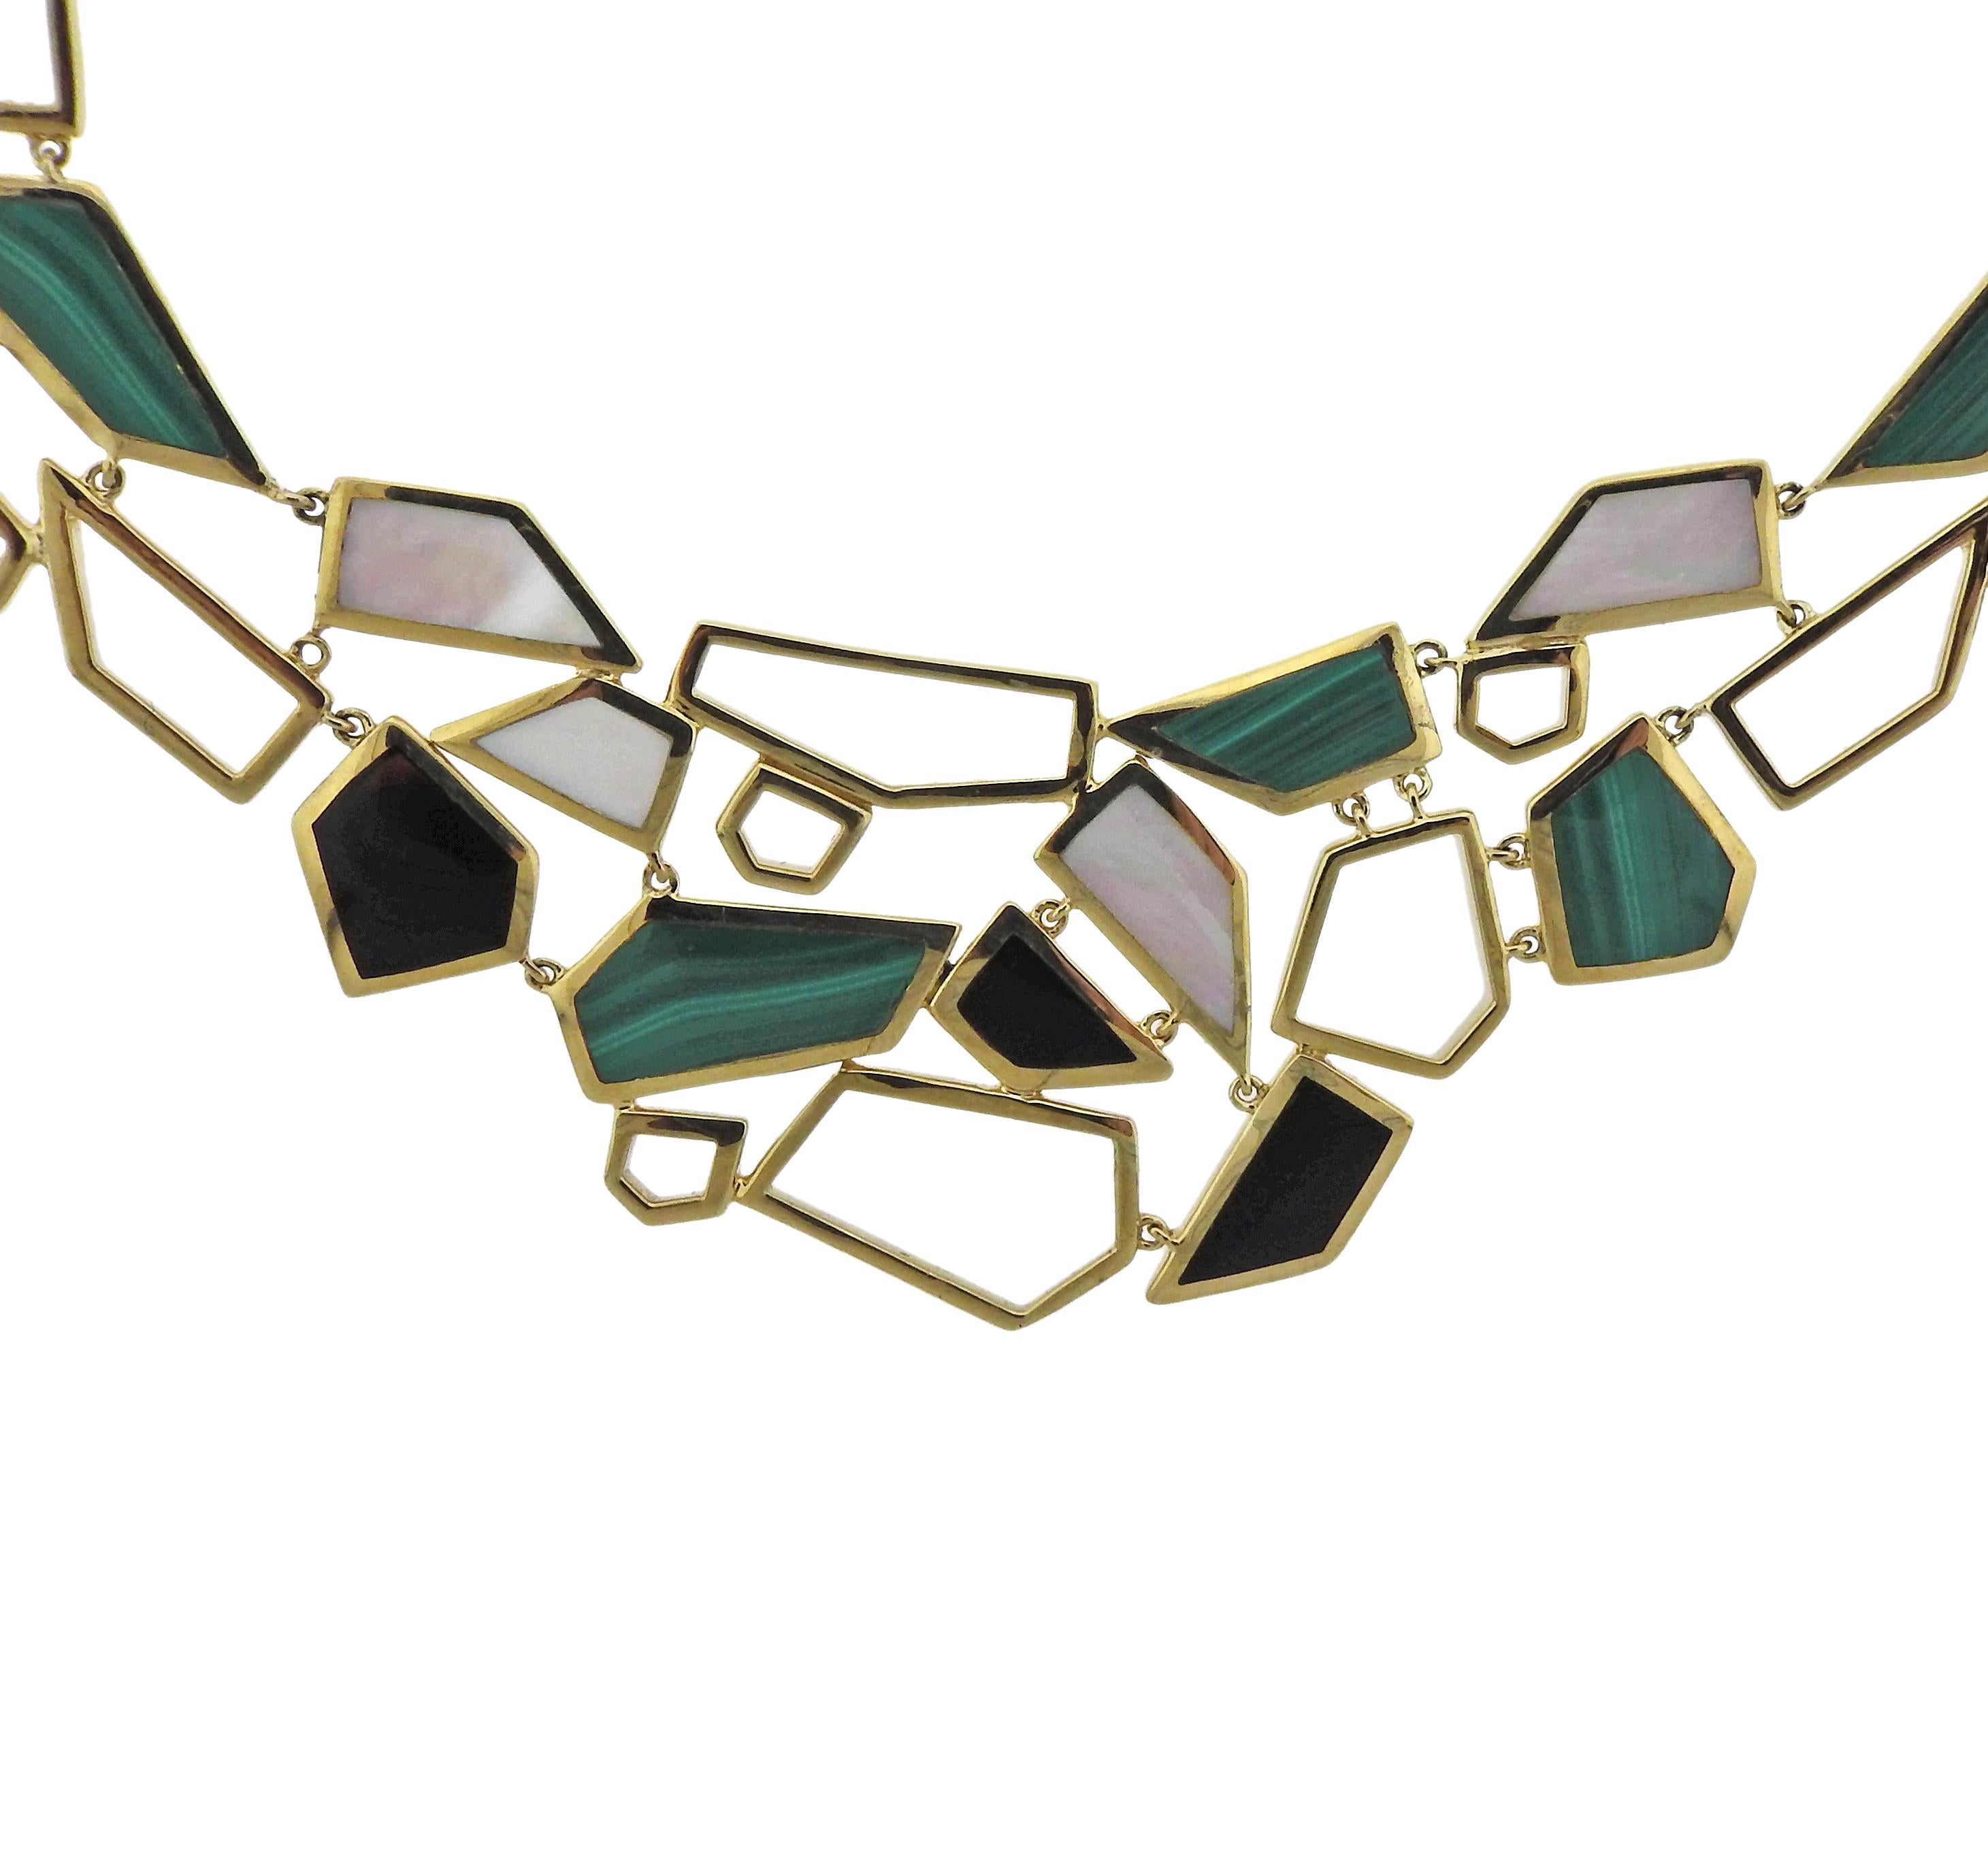 Impressive 18k gold necklace, crafted by Ippolita,set with onyx, malachite and mother of pearl mosaic design. Necklace is 17 1/4